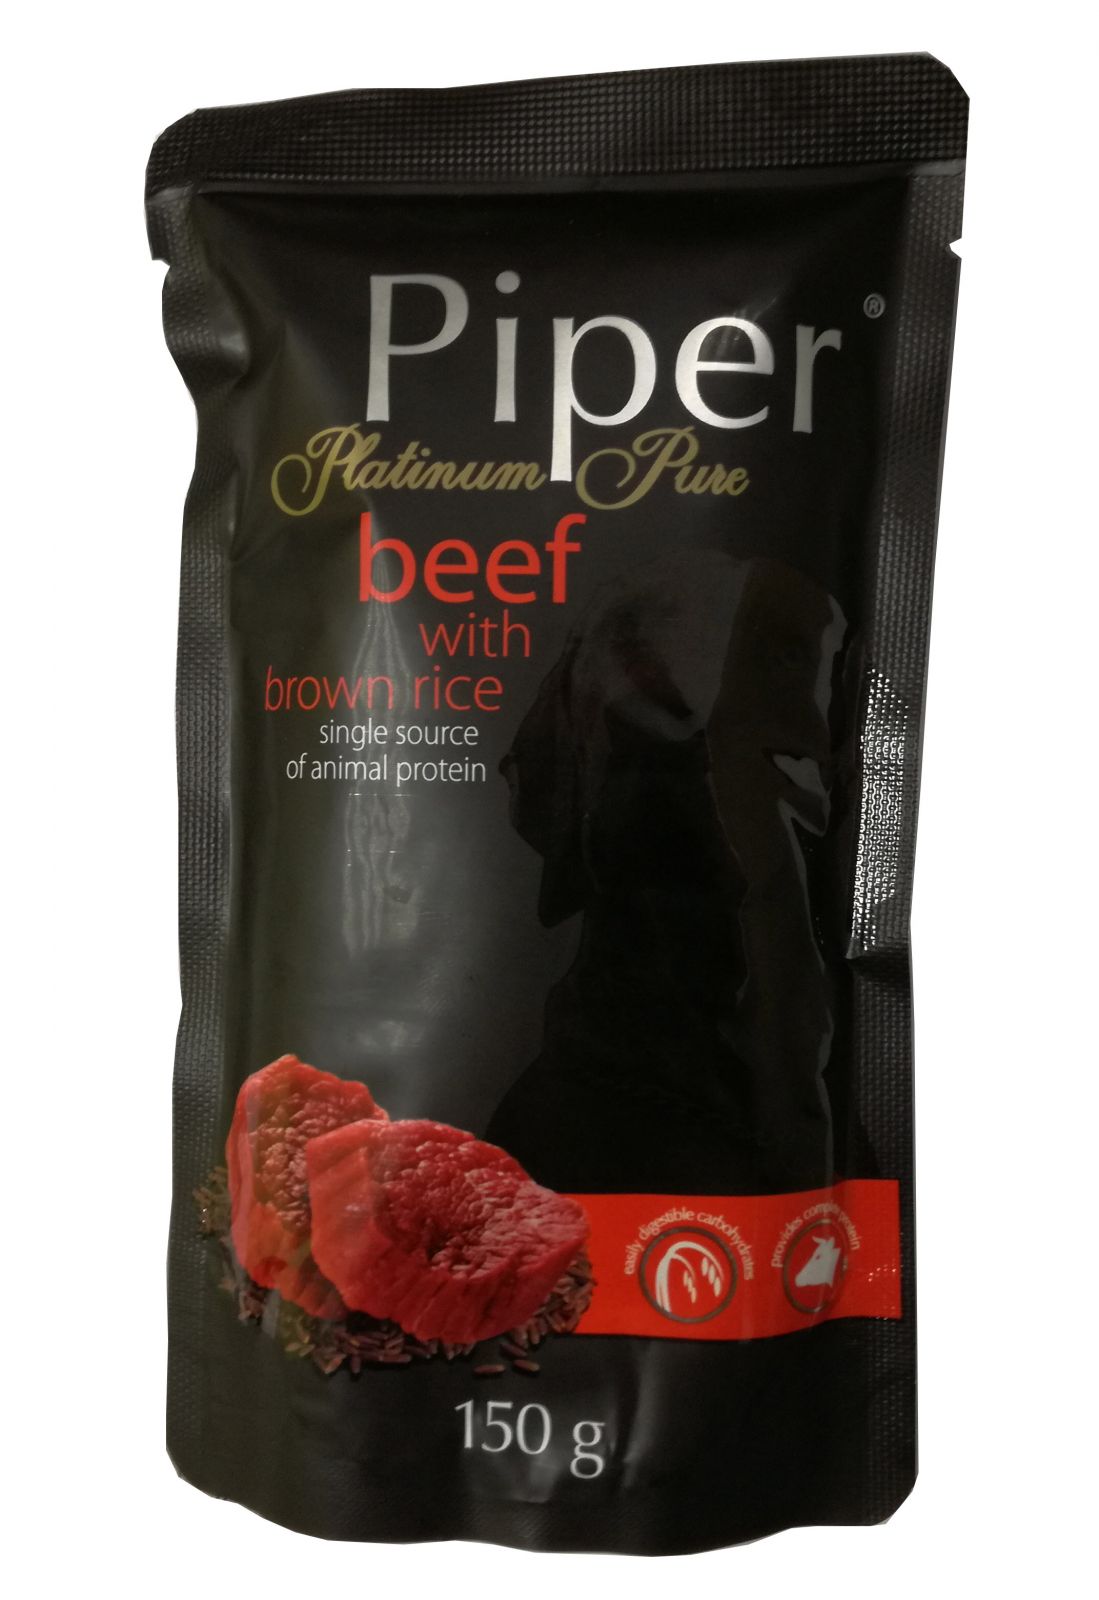 Piper Platinum Pure - Beef with Brown Rice 150g